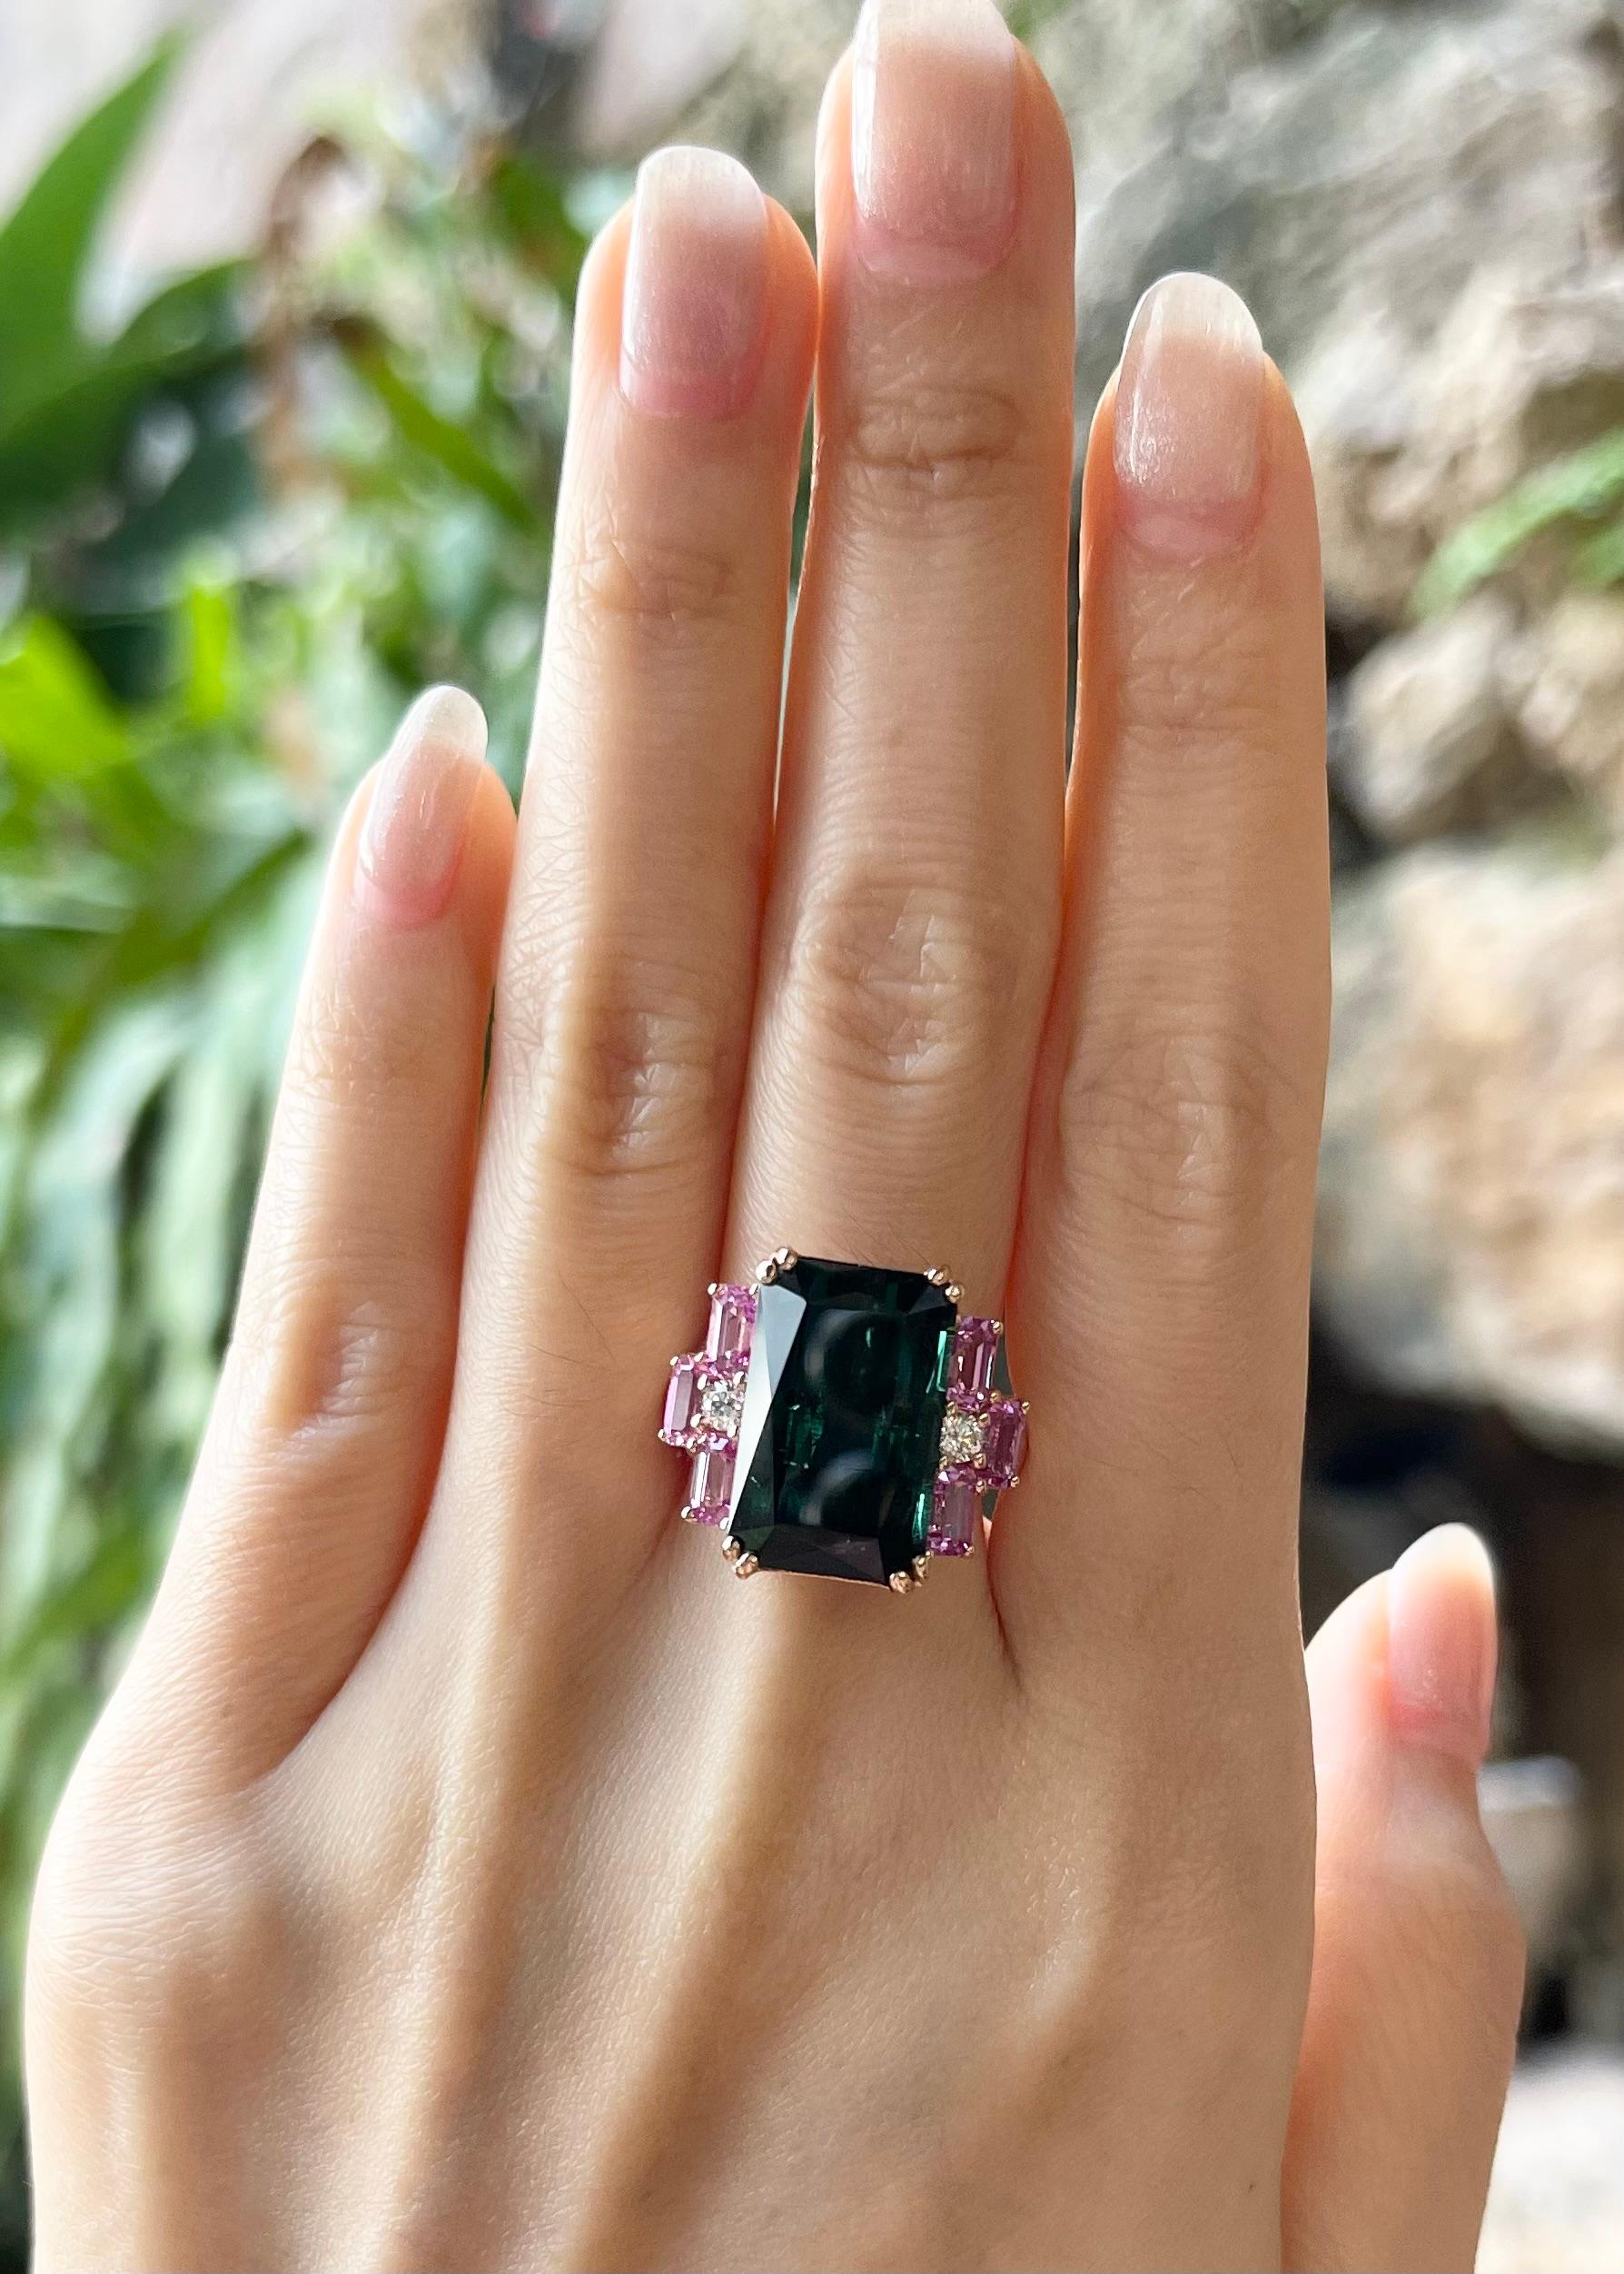 Green Tourmaline 11.43 carats, Pink Sapphire 2.17 carats and Diamond 0.14 carat Ring set in 18K Rose Gold Settings

Width:  2.0 cm 
Length: 1.7 cm
Ring Size: 54
Total Weight: 11.45 grams

Green Tourmaline
Width:  1.0 cm 
Length: 1.7 cm

